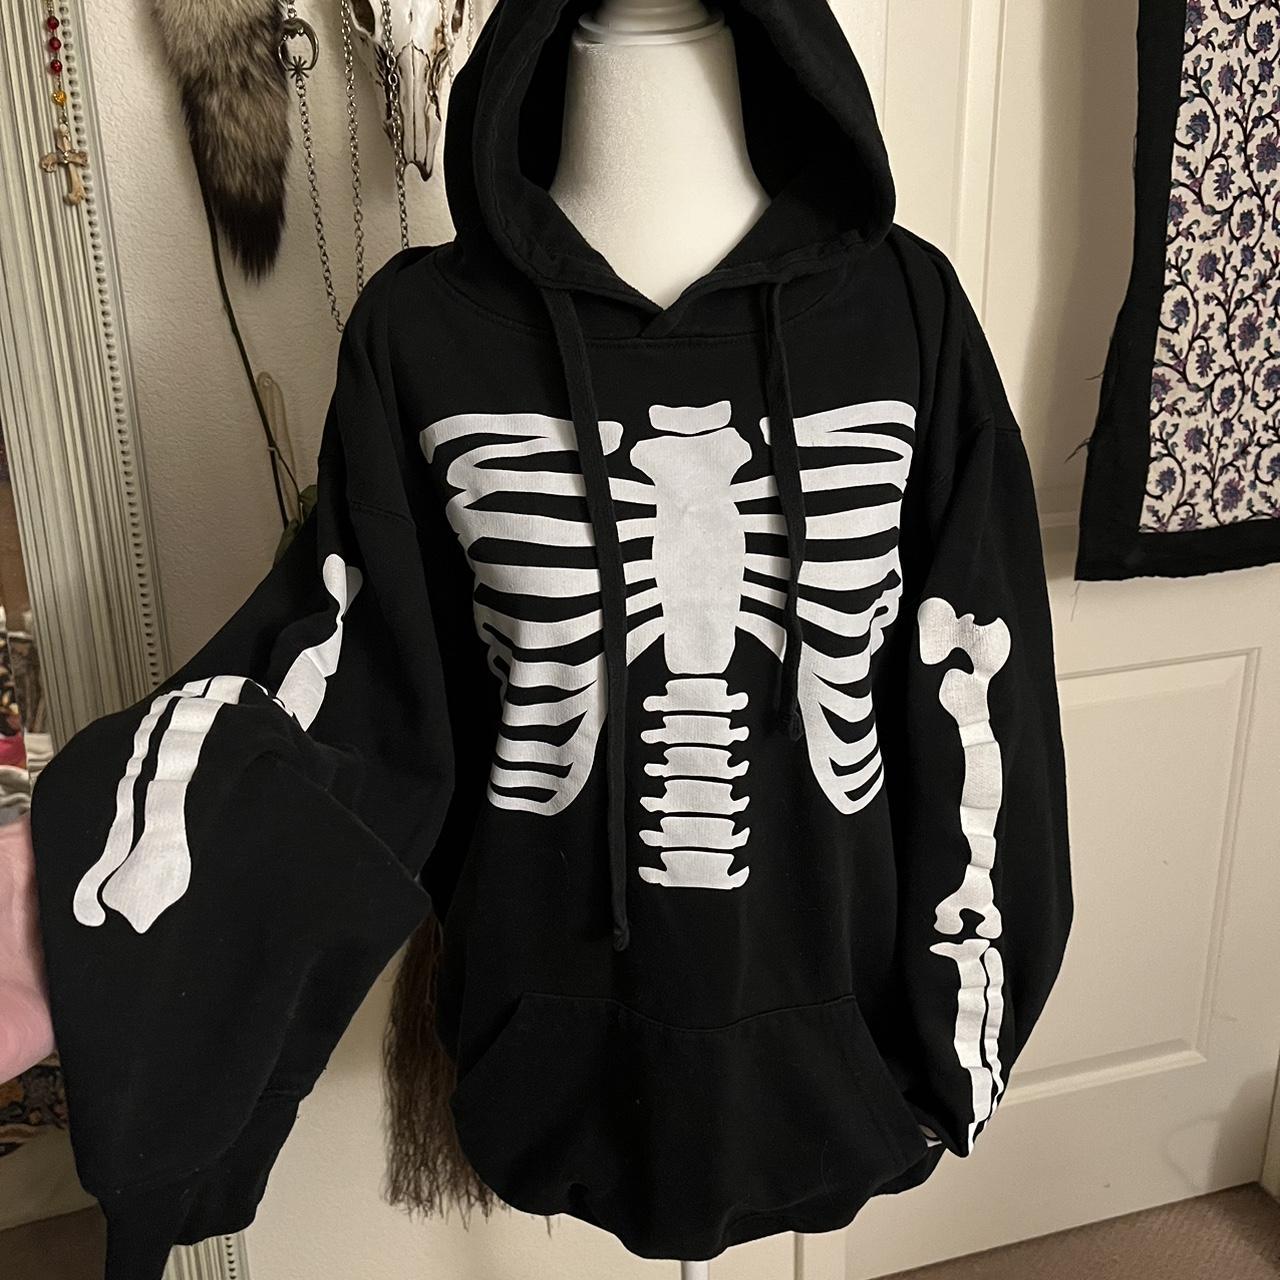 Skeleton hoodie from Hot Topic🖤☠️ size L - Depop